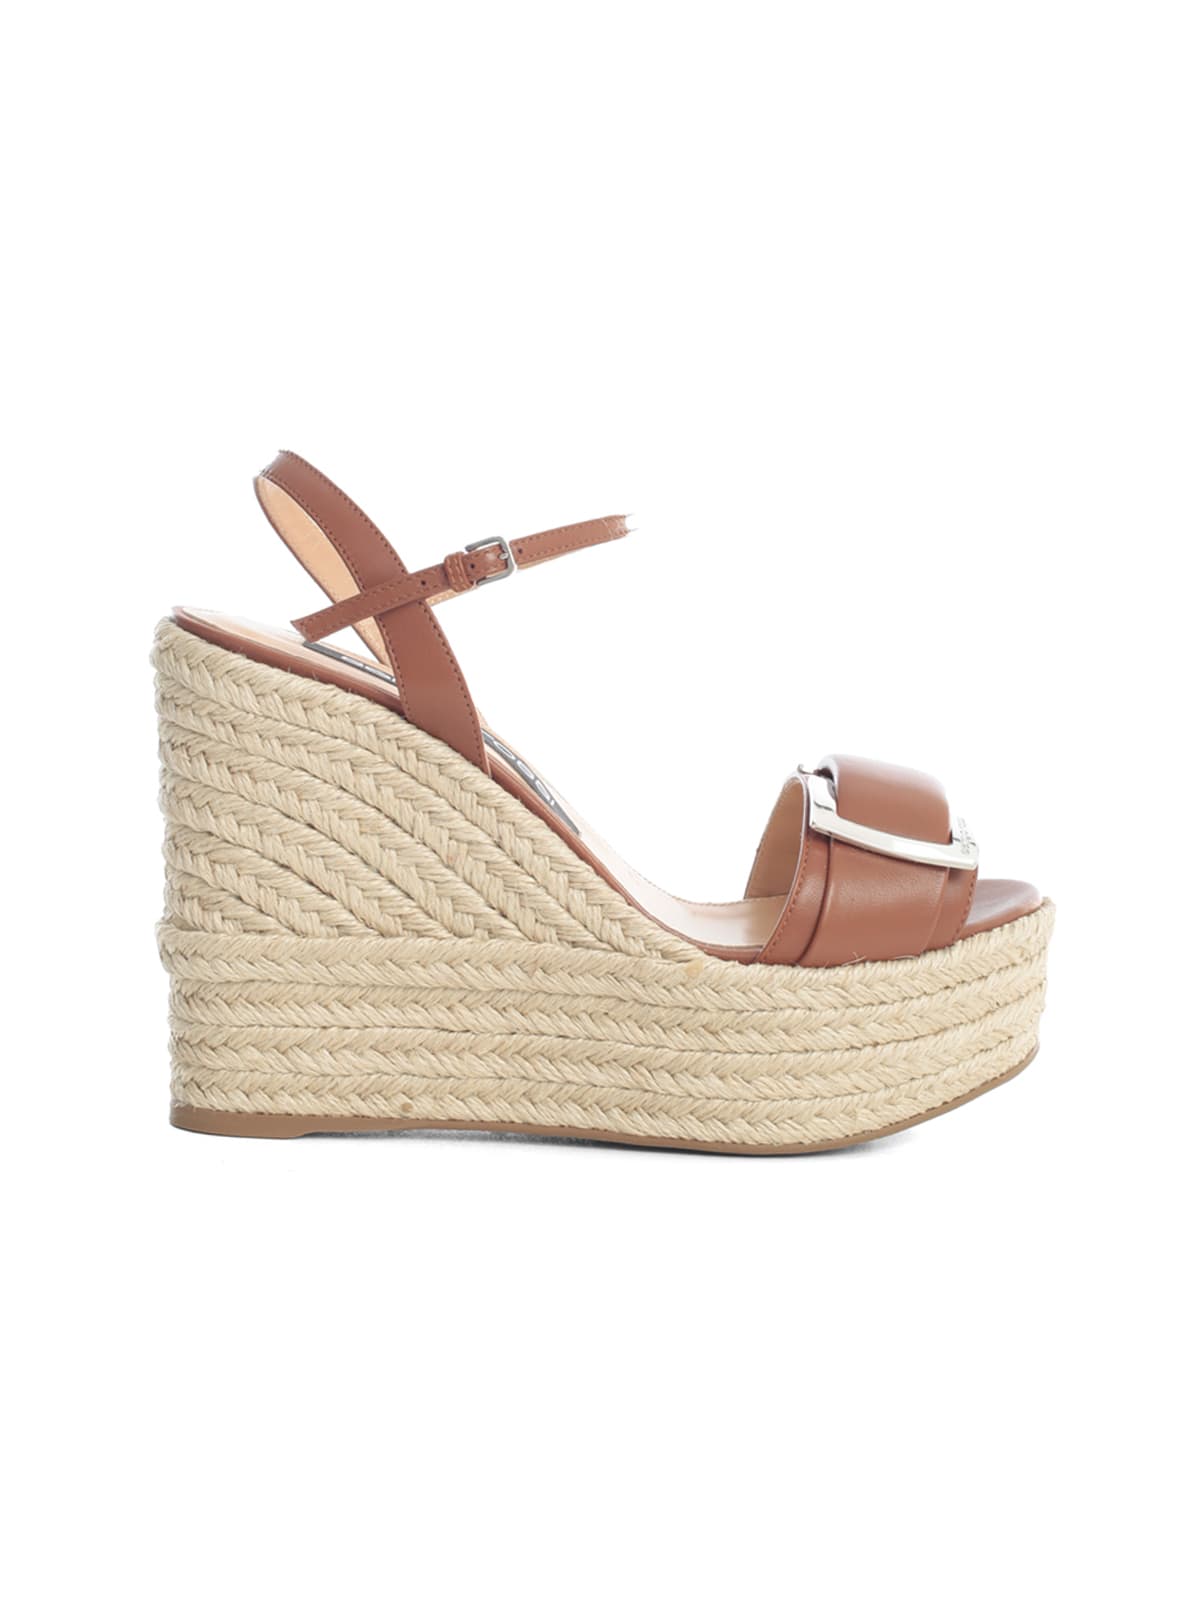 Buy Sergio Rossi Wedge Sandal W/buckle online, shop Sergio Rossi shoes with free shipping